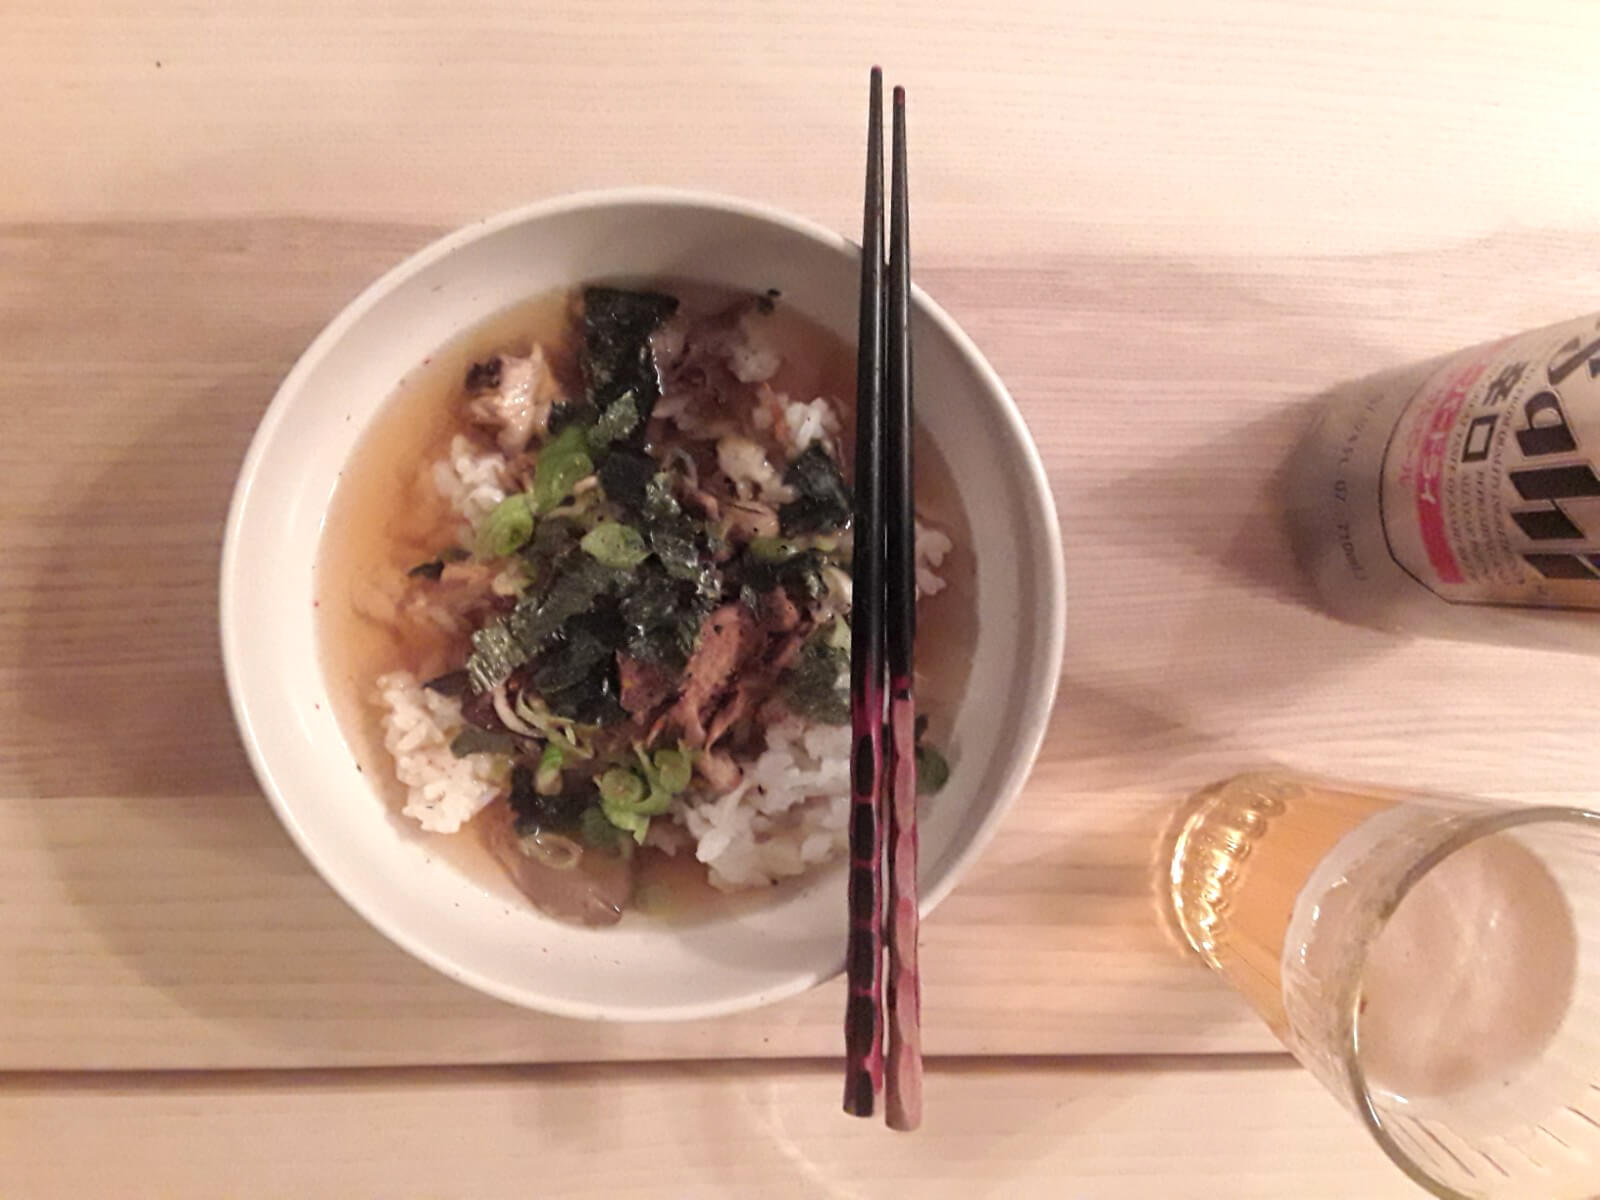 A bowl filled with dashi, rice, seaweed, and other garnishes sits on a table. A pair of chopsticks are on top of the bowl. Next to the bowl is a can of Asahi beer and a glass filled with the beer. (April 2020)